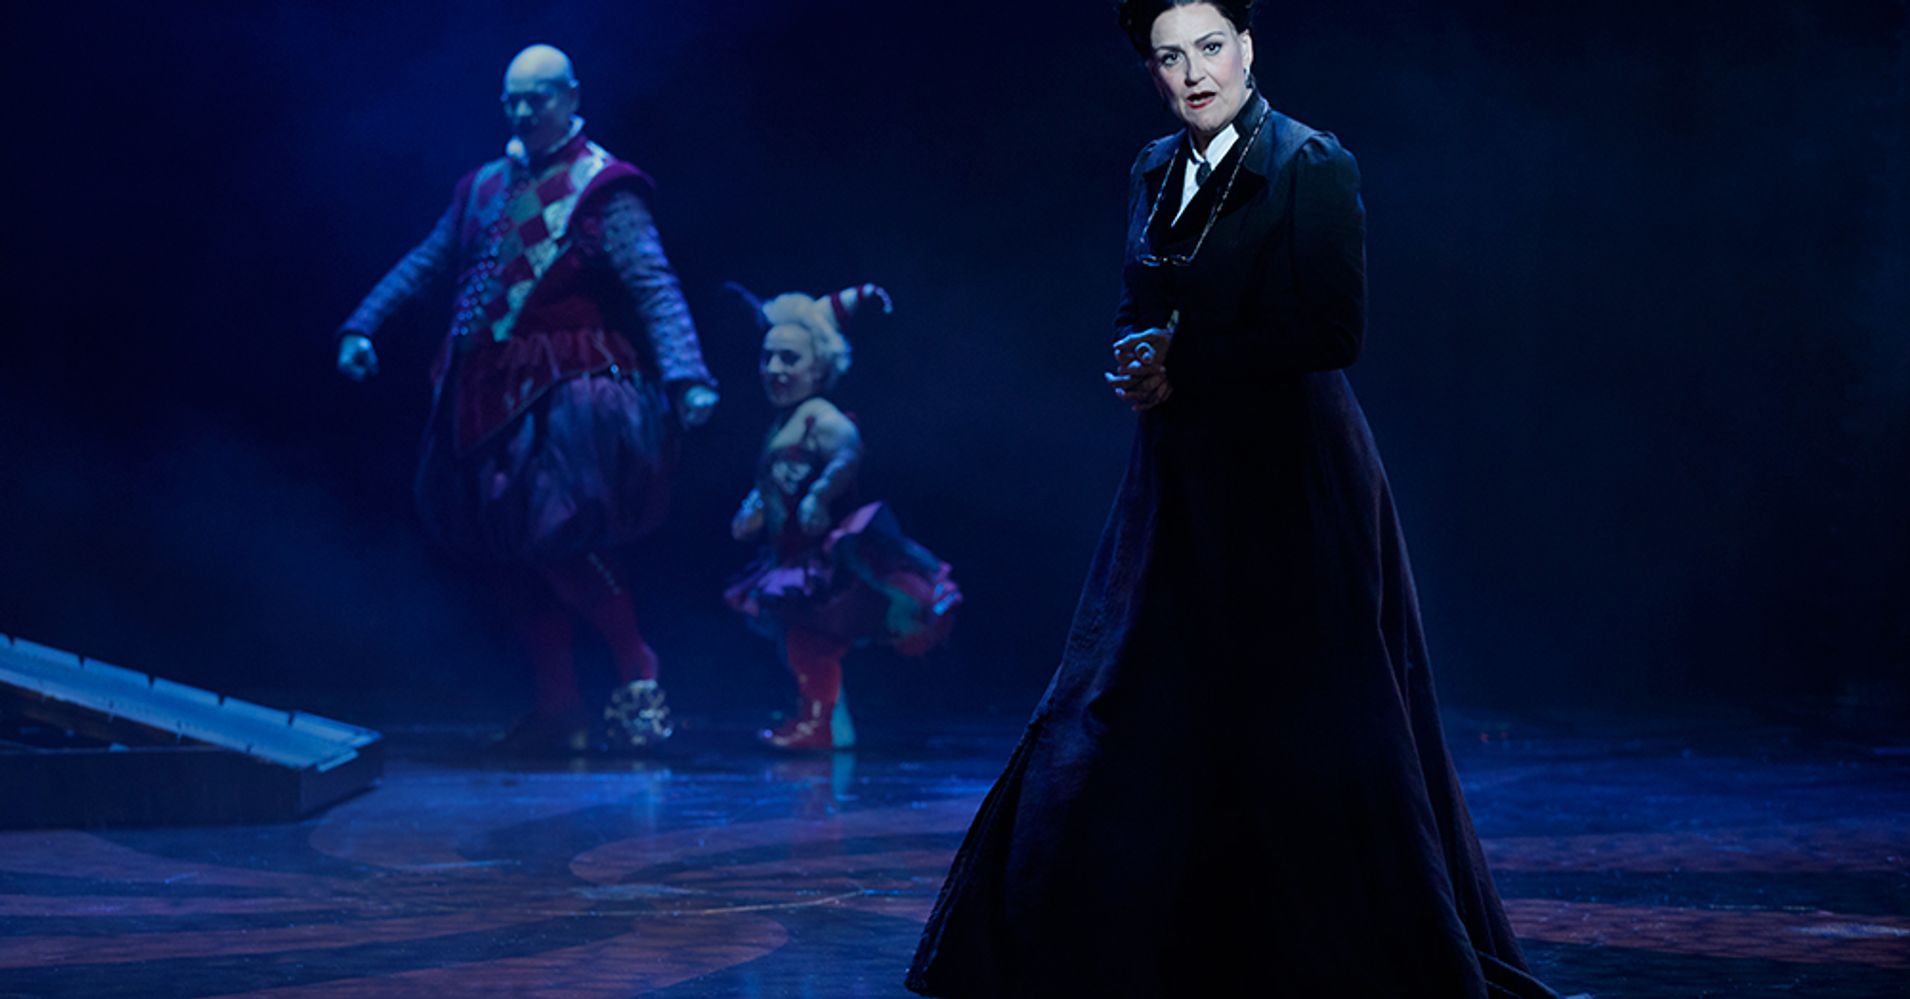 'The Phantom of the Opera' Sequel 'Love Never Dies' Debuts North